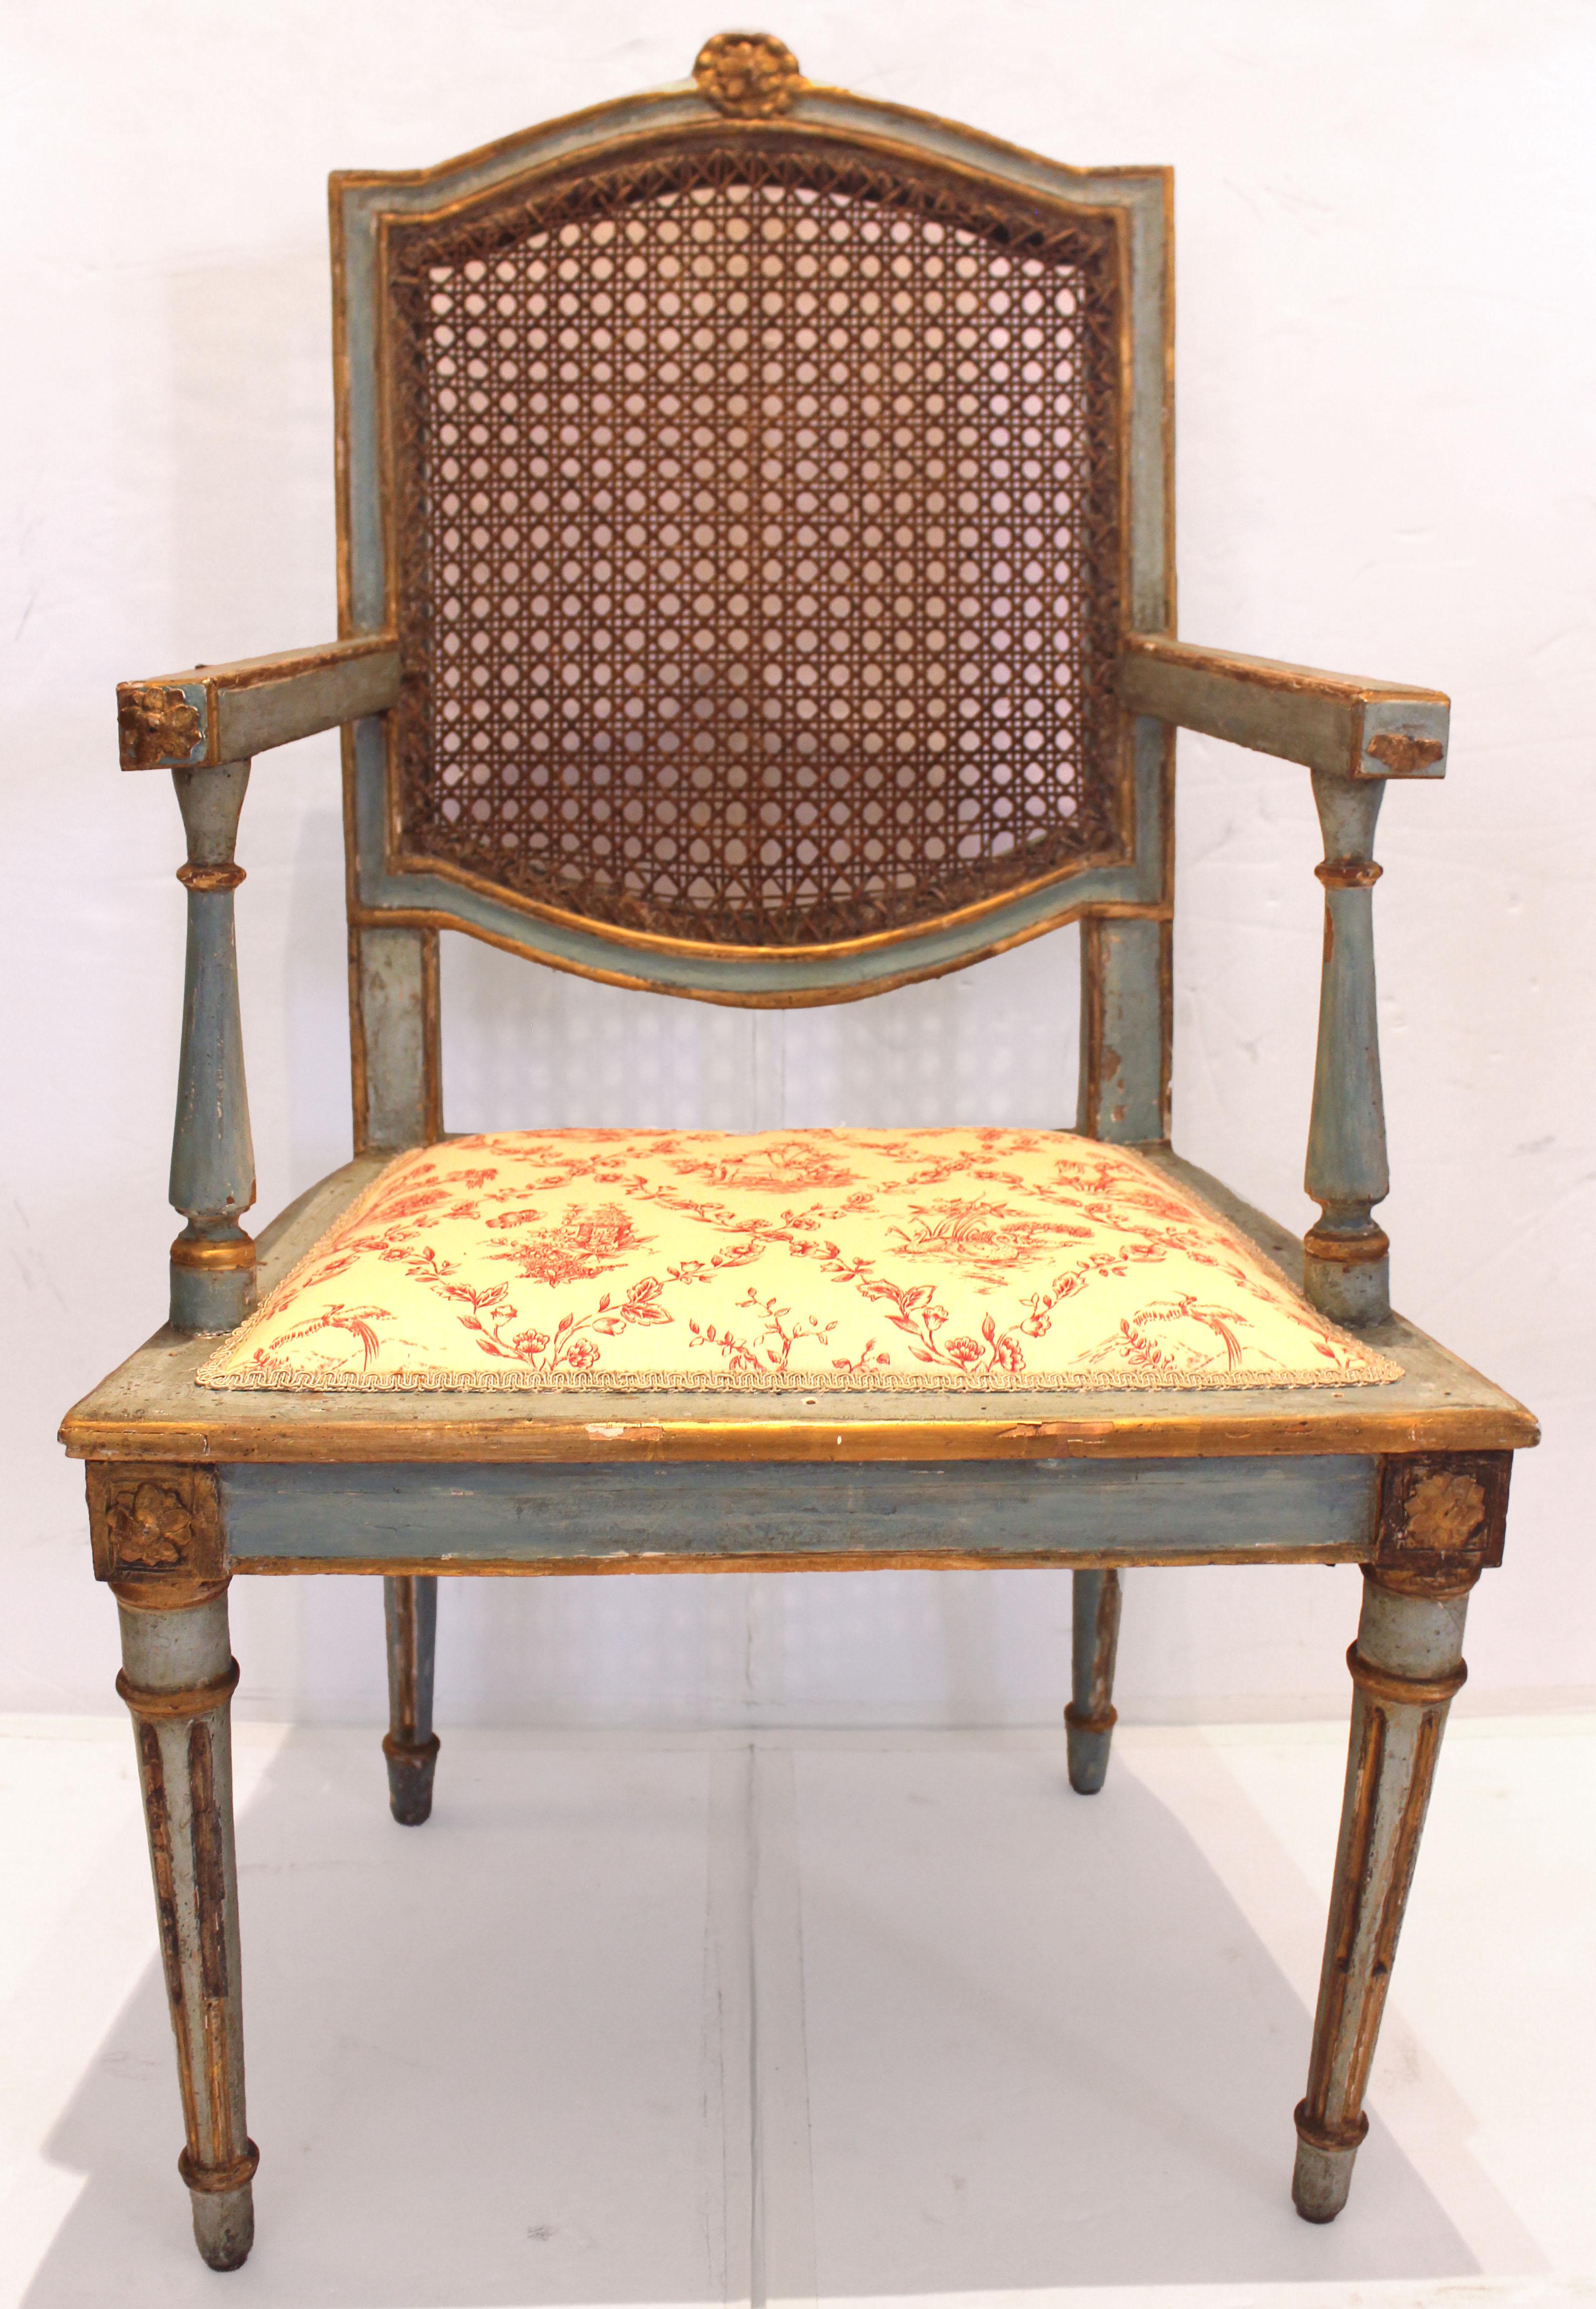 Late 18th century set of 6 painted & parcel gilt arm chairs, Italian. Neo-classical period & taste. Small beaded florets break the arch of the crest rails, the florets repeated at each front & side of the front legs & arm tip. Raised on turned,